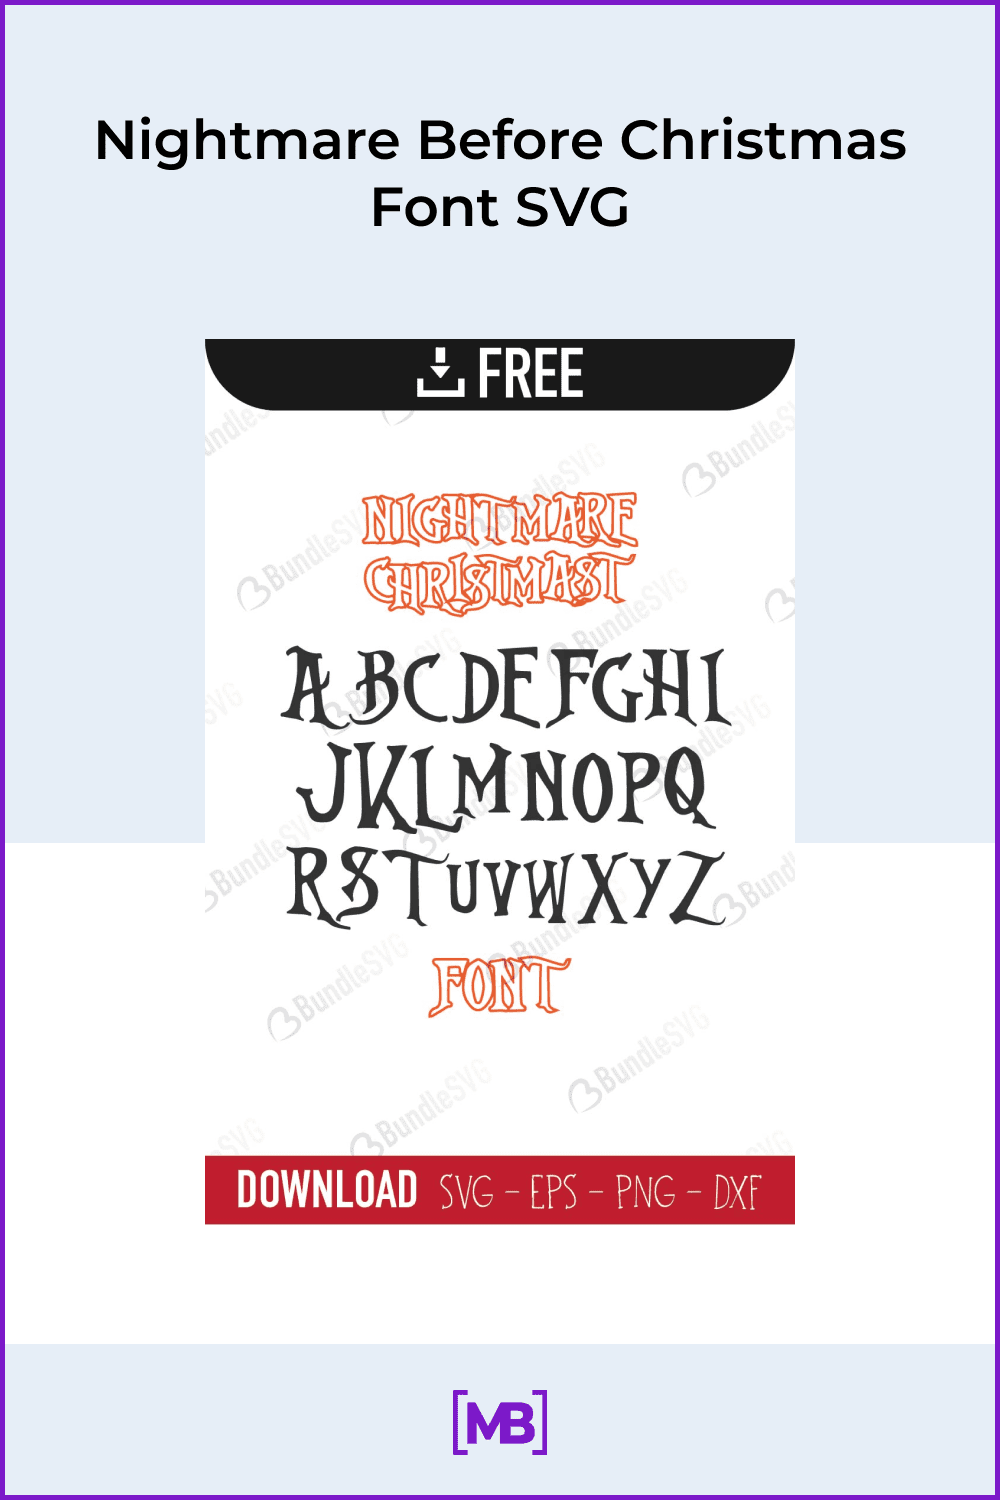 Nightmare Before Christmas Font SVG.